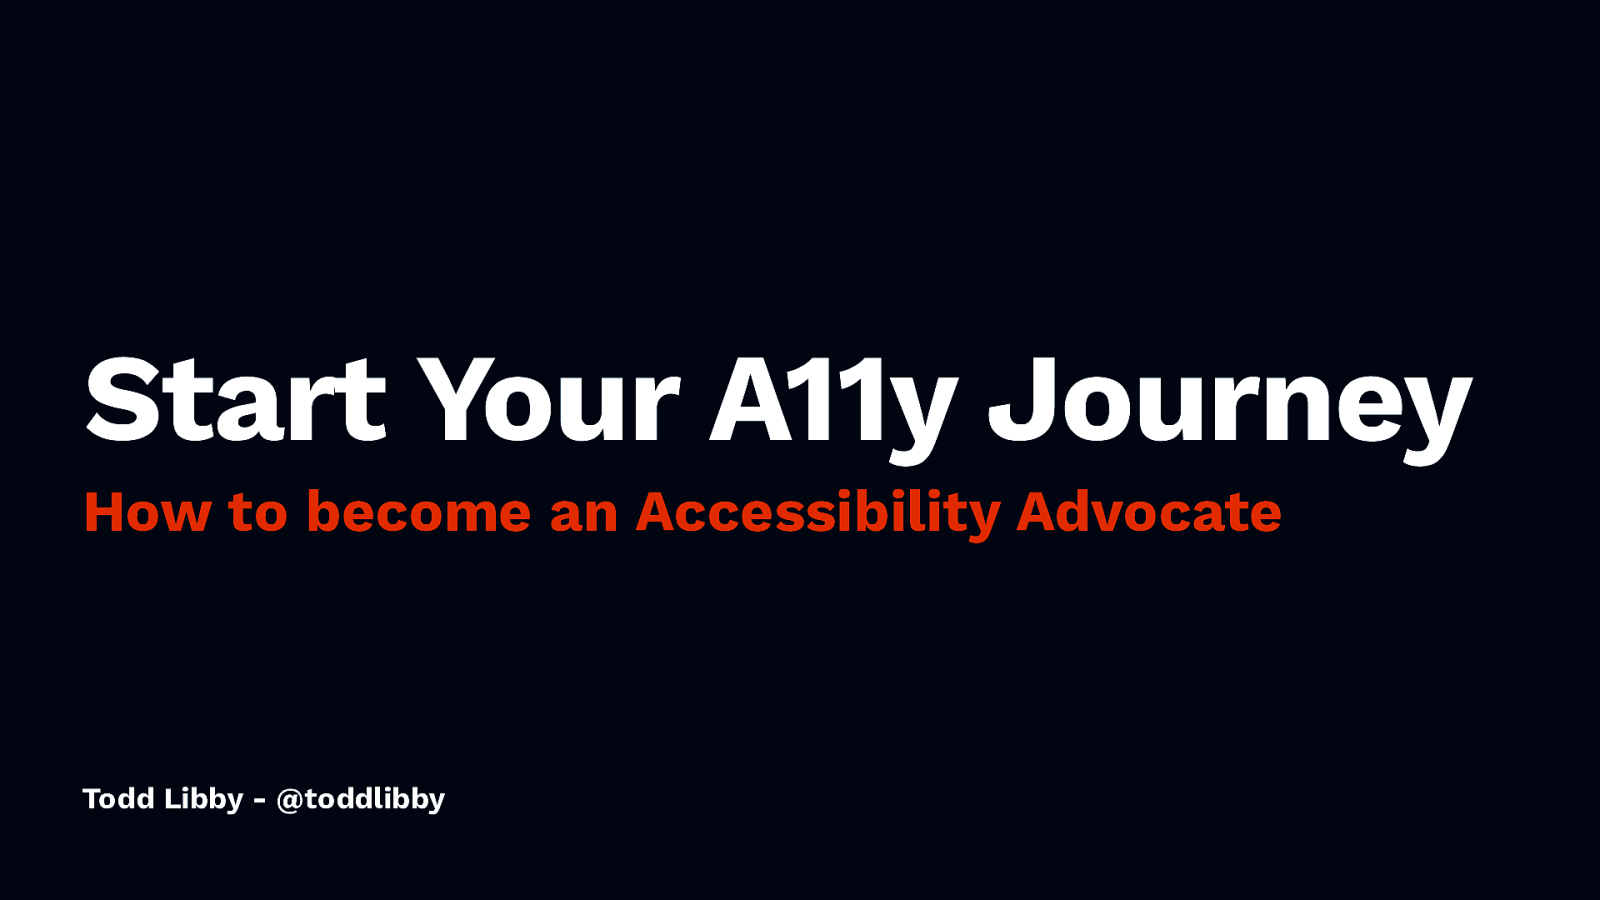 Start your A11y Journey: How to Become an Accessibility Advocate